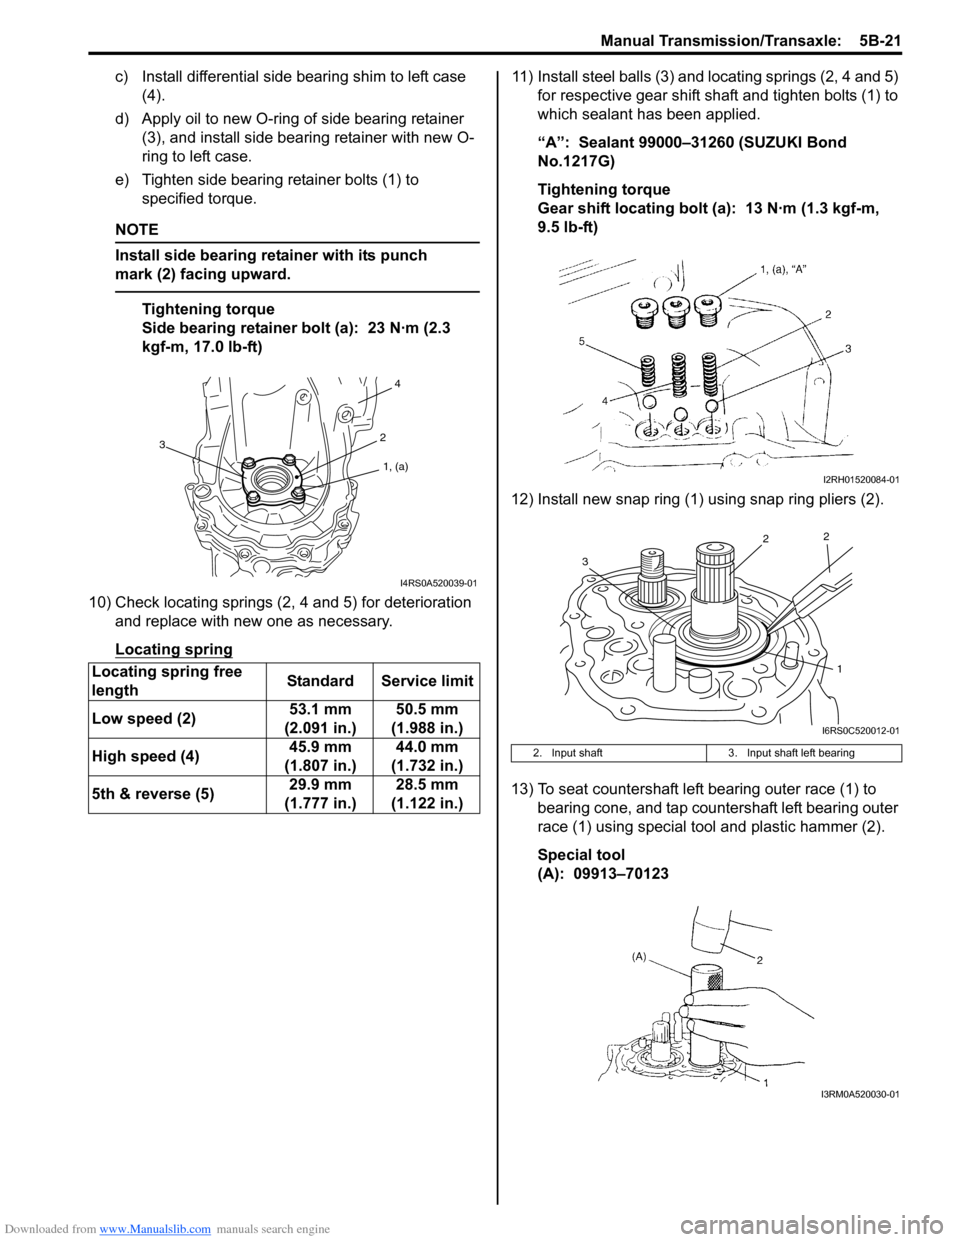 SUZUKI SWIFT 2006 2.G Service Owners Guide Downloaded from www.Manualslib.com manuals search engine Manual Transmission/Transaxle:  5B-21
c) Install differential side bearing shim to left case (4).
d) Apply oil to new O-ring of side bearing re